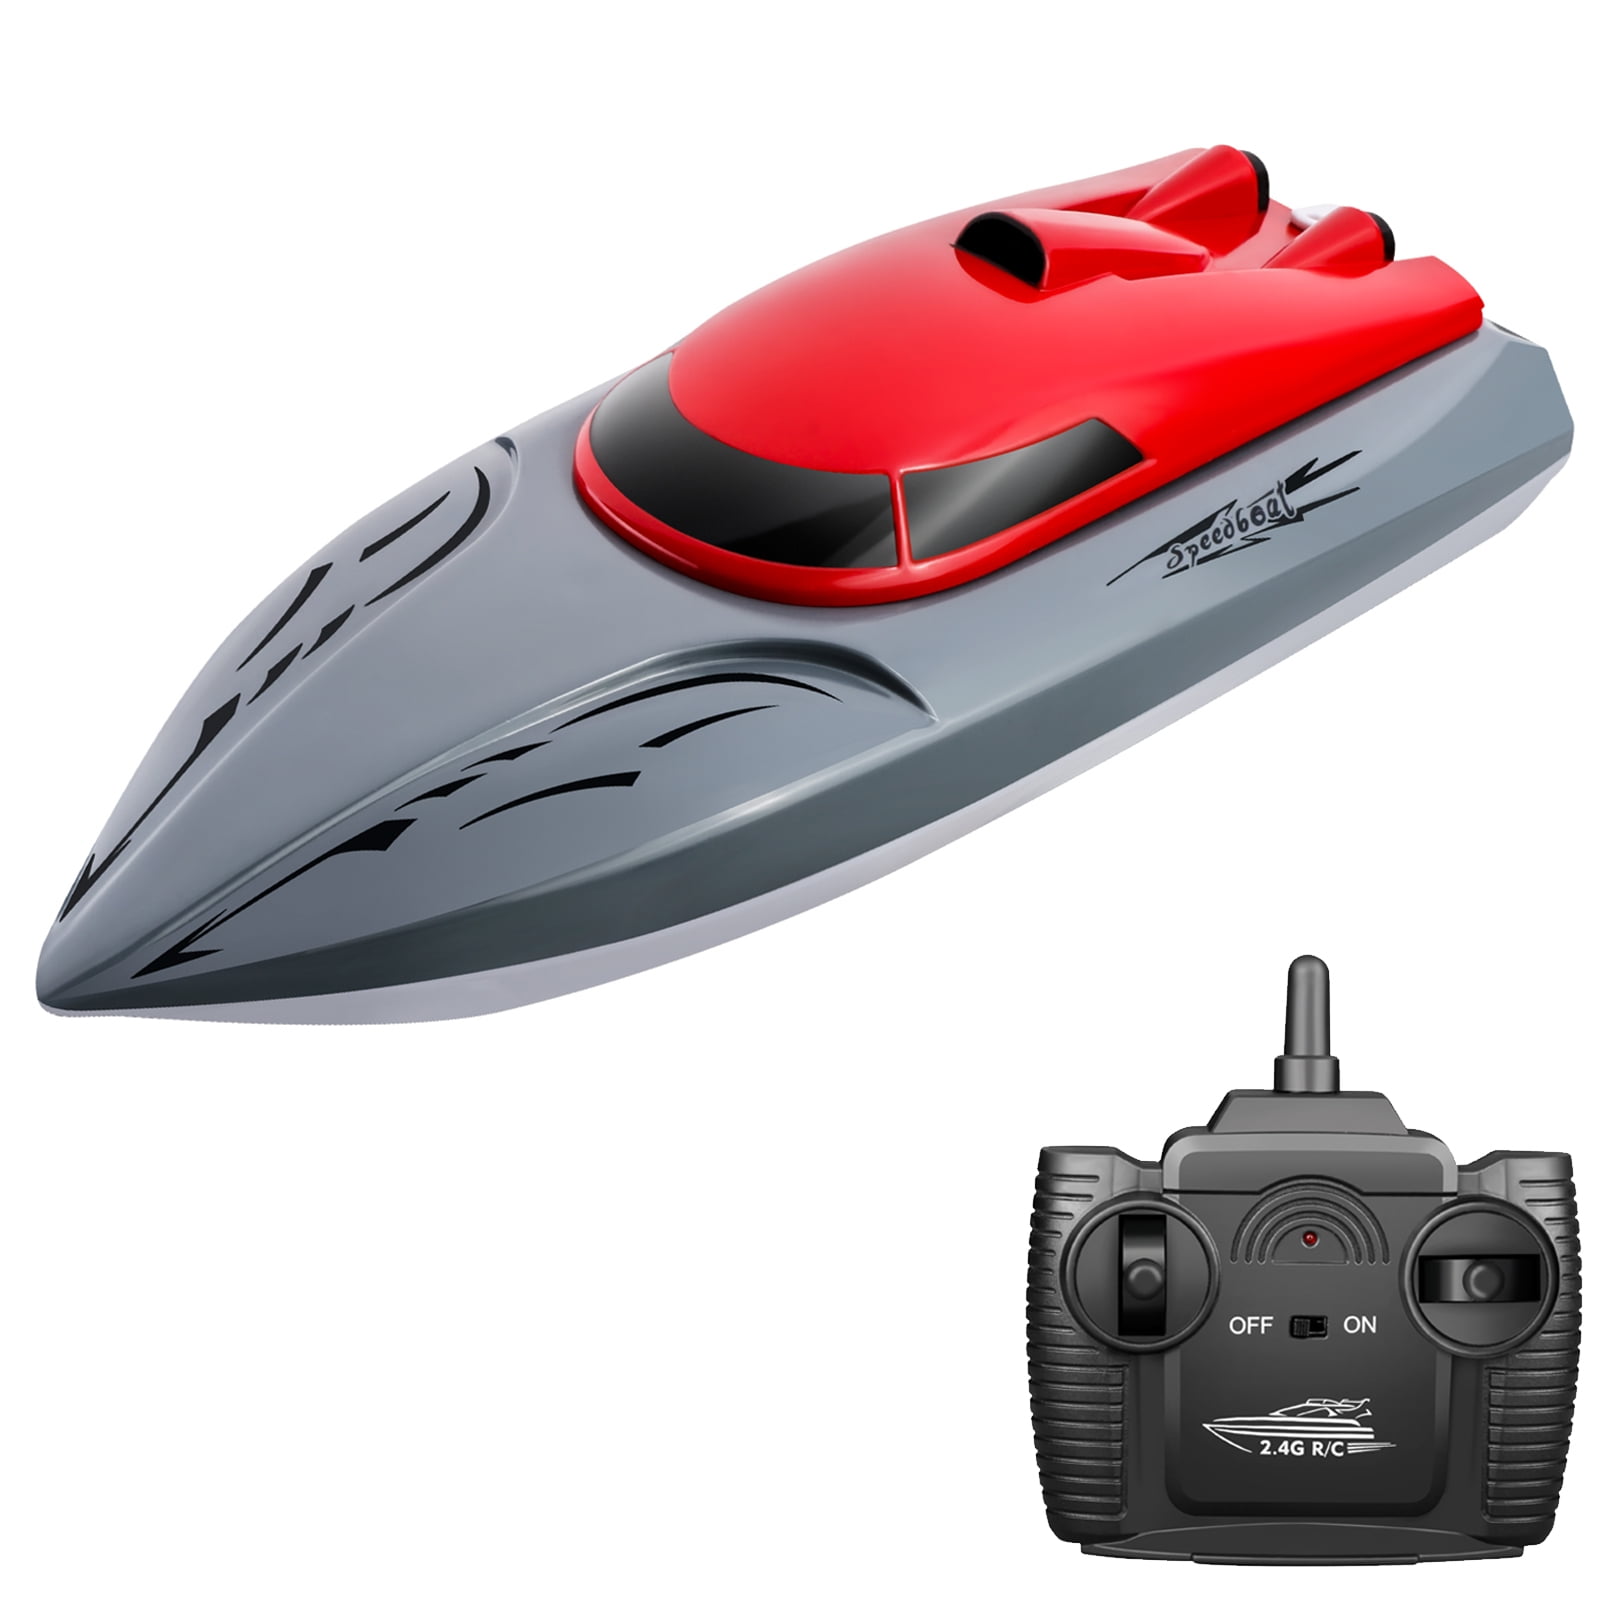 Lakes Lelestar Mini RC Boat RC Submarine Toy Underwater Submarine Bath Toy Remote Control Boat In Bathtub Pools Blue Fast RC Race Boat High Speed Toy Boat Gifts For Kids